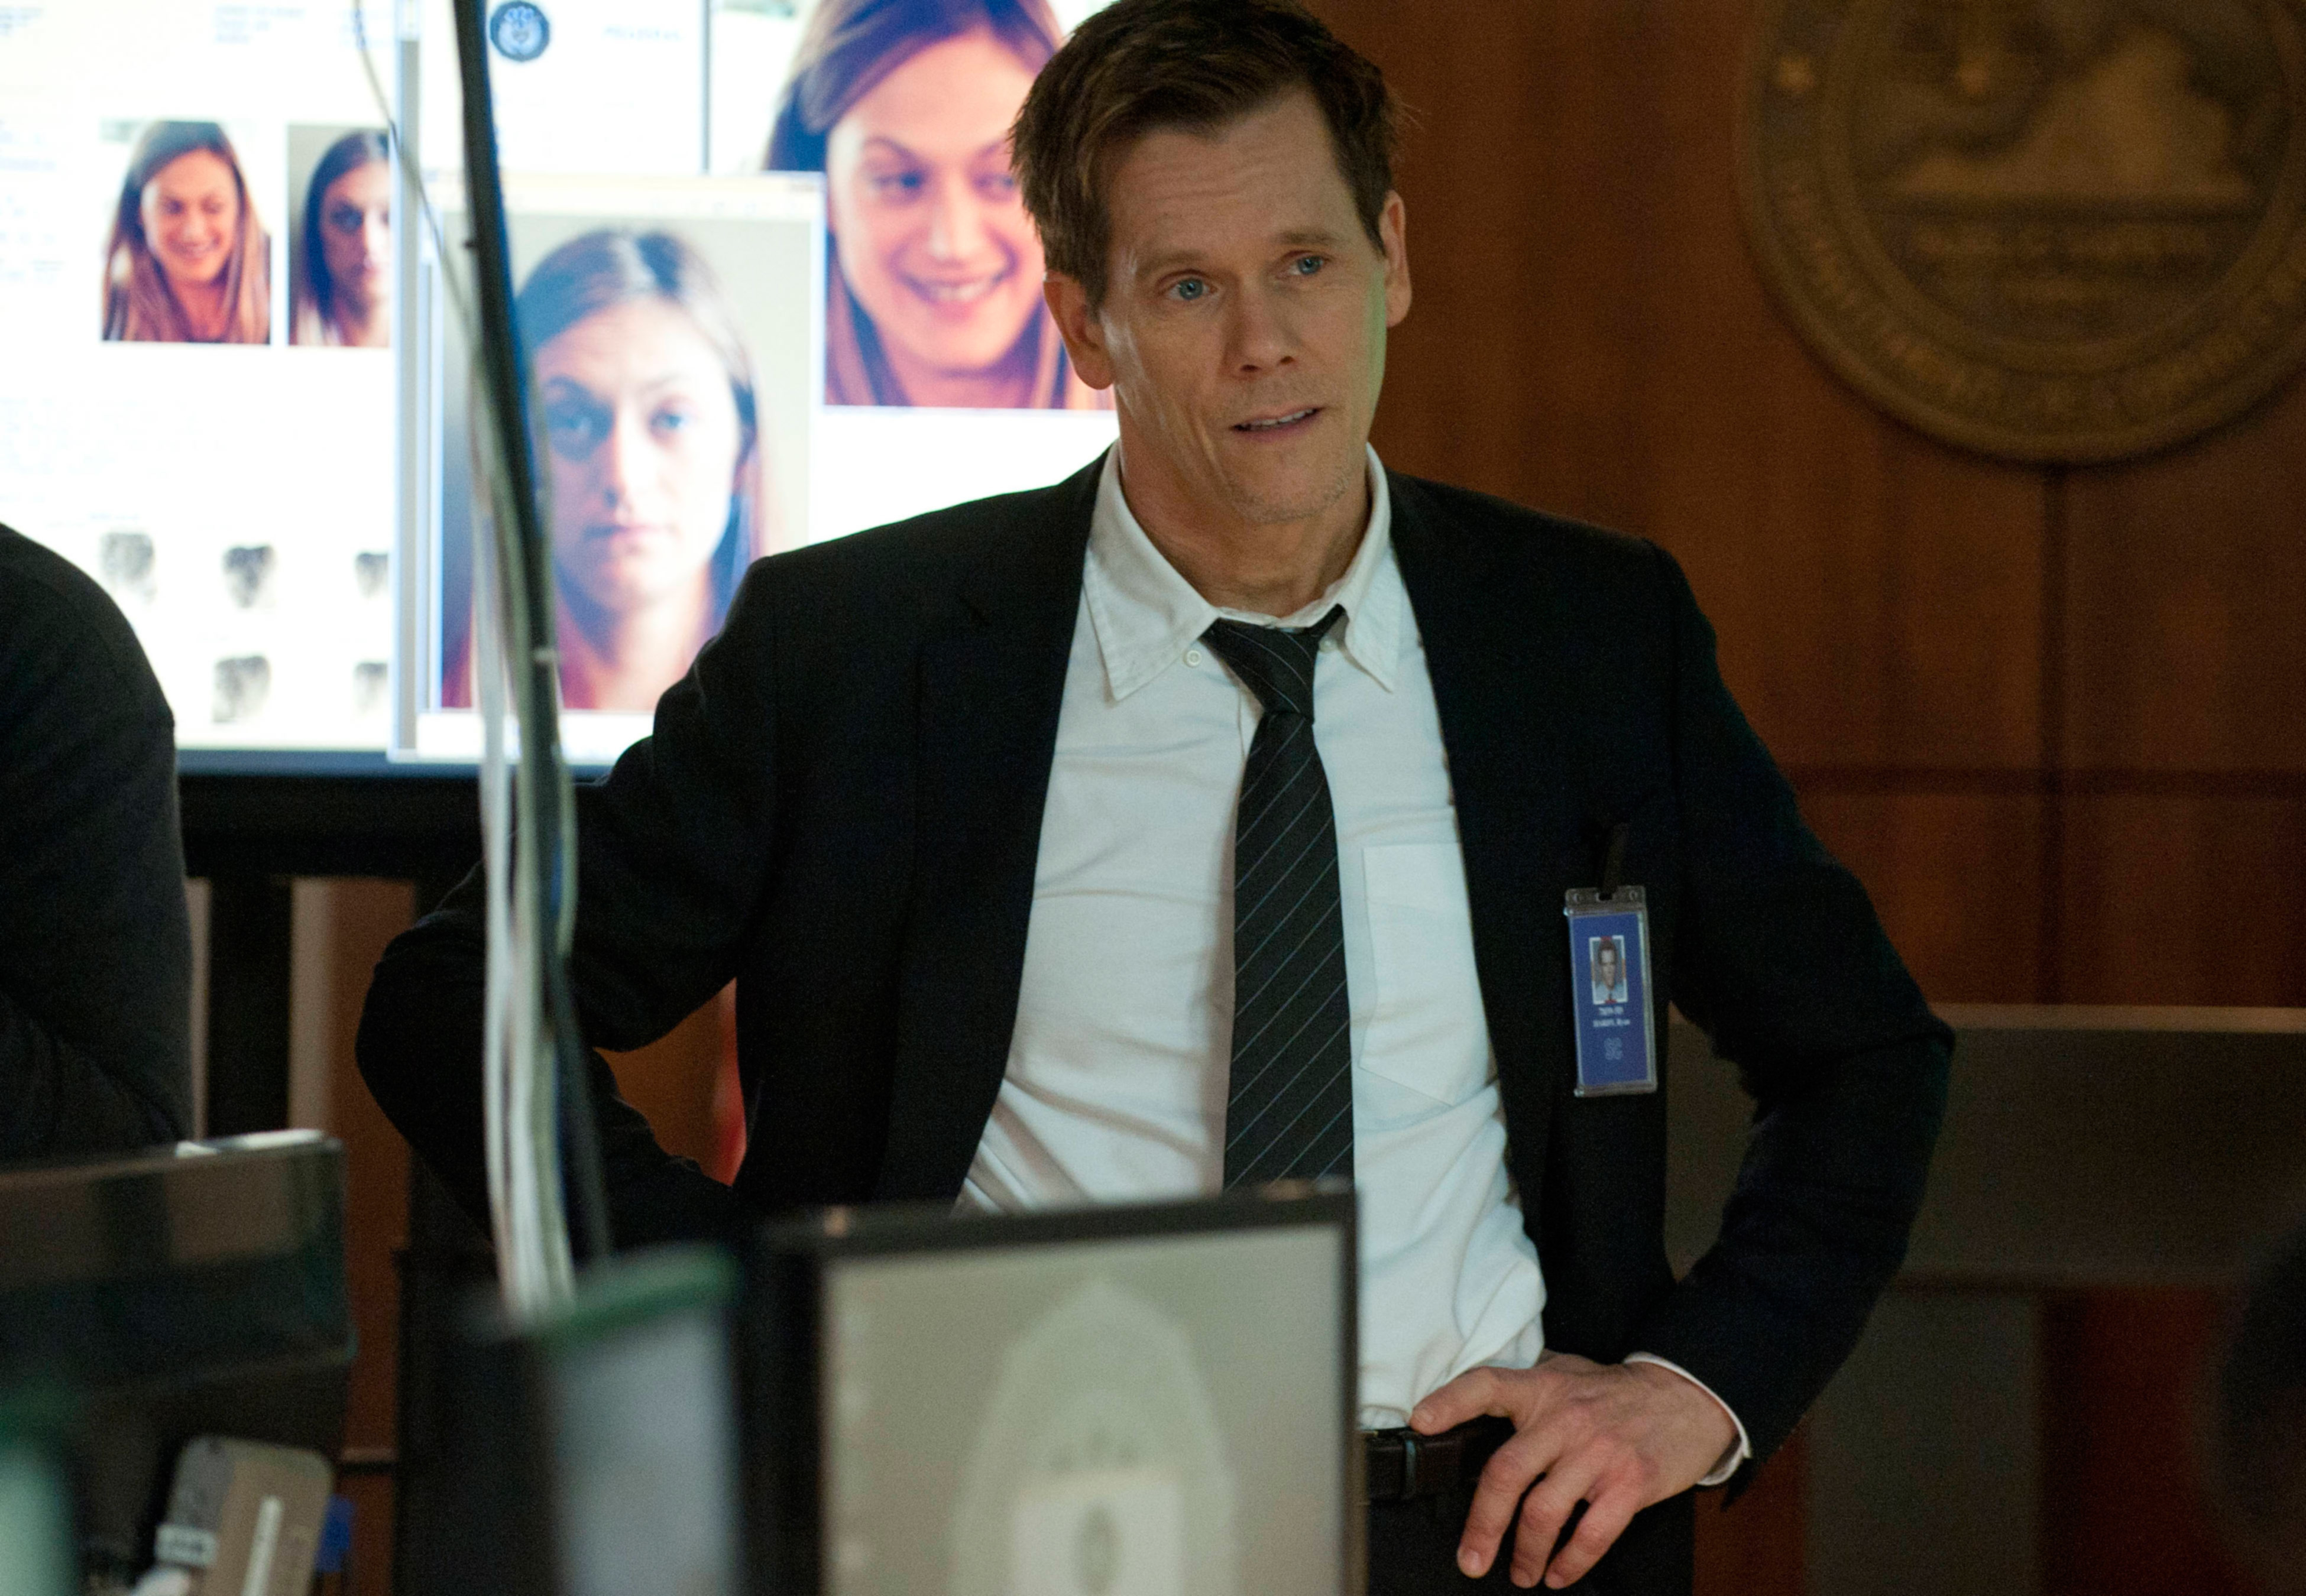 Kevin Bacon in a suit with badge, portraying an FBI agent in a film, with monitors displaying faces in the background